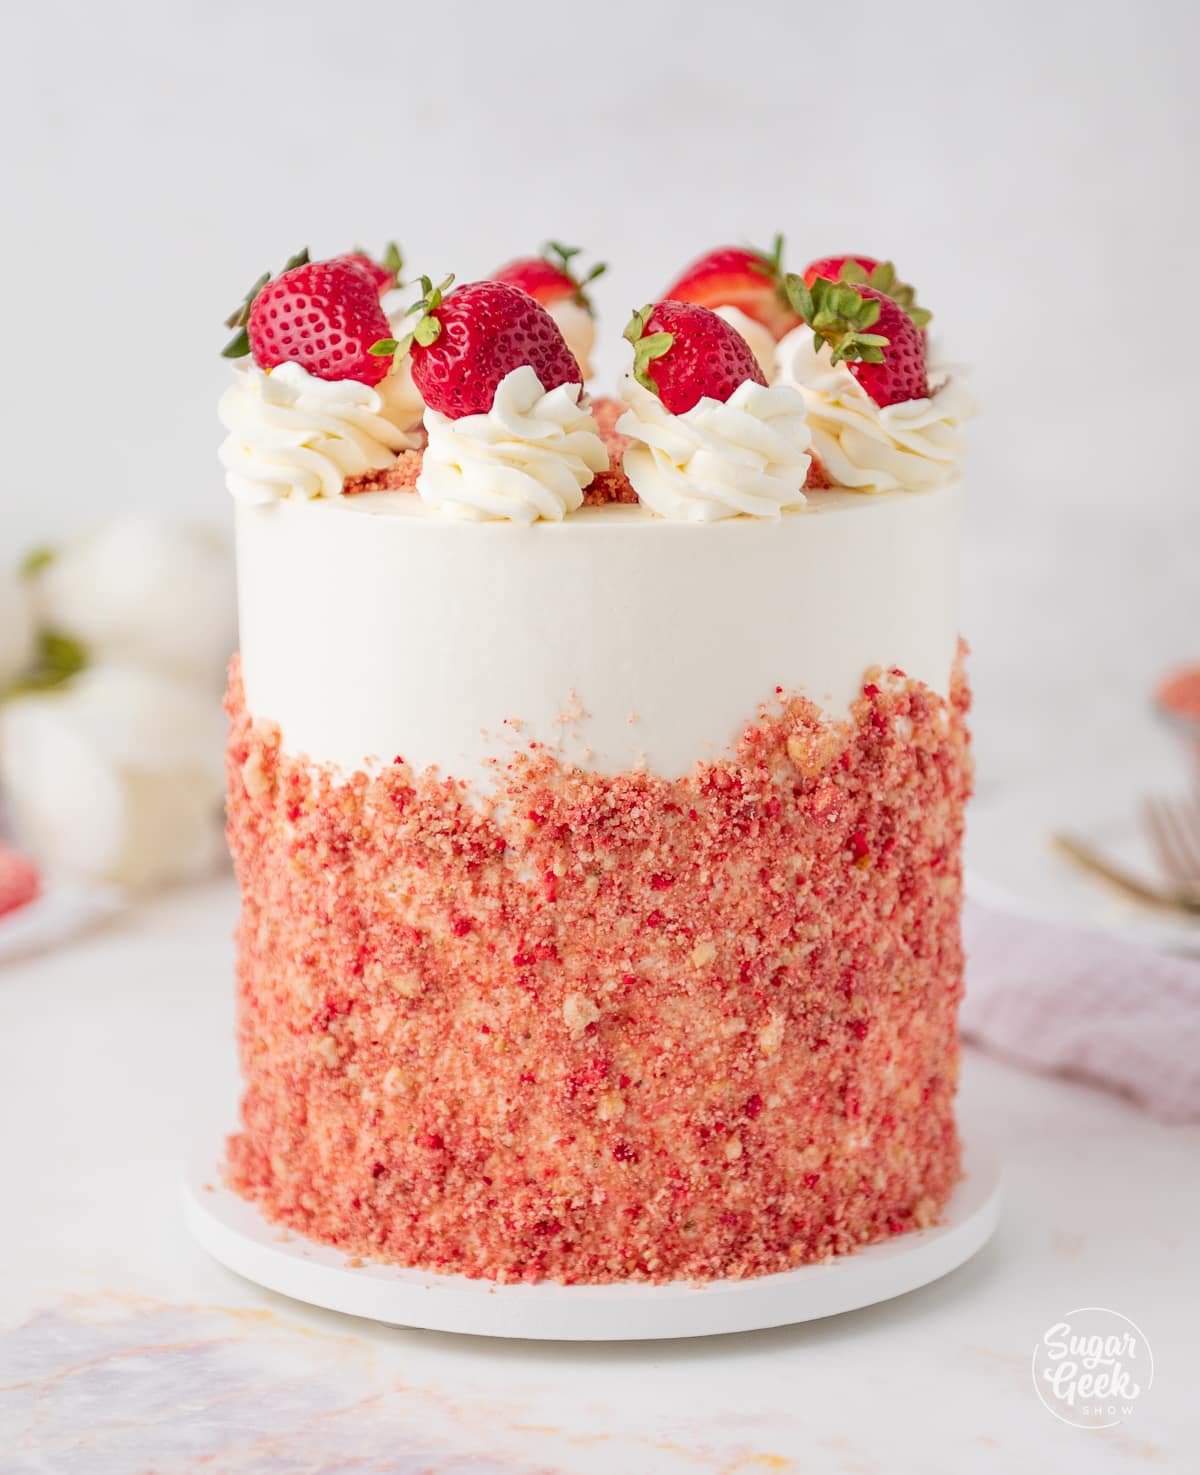 picture of finished strawberry crunch cake.